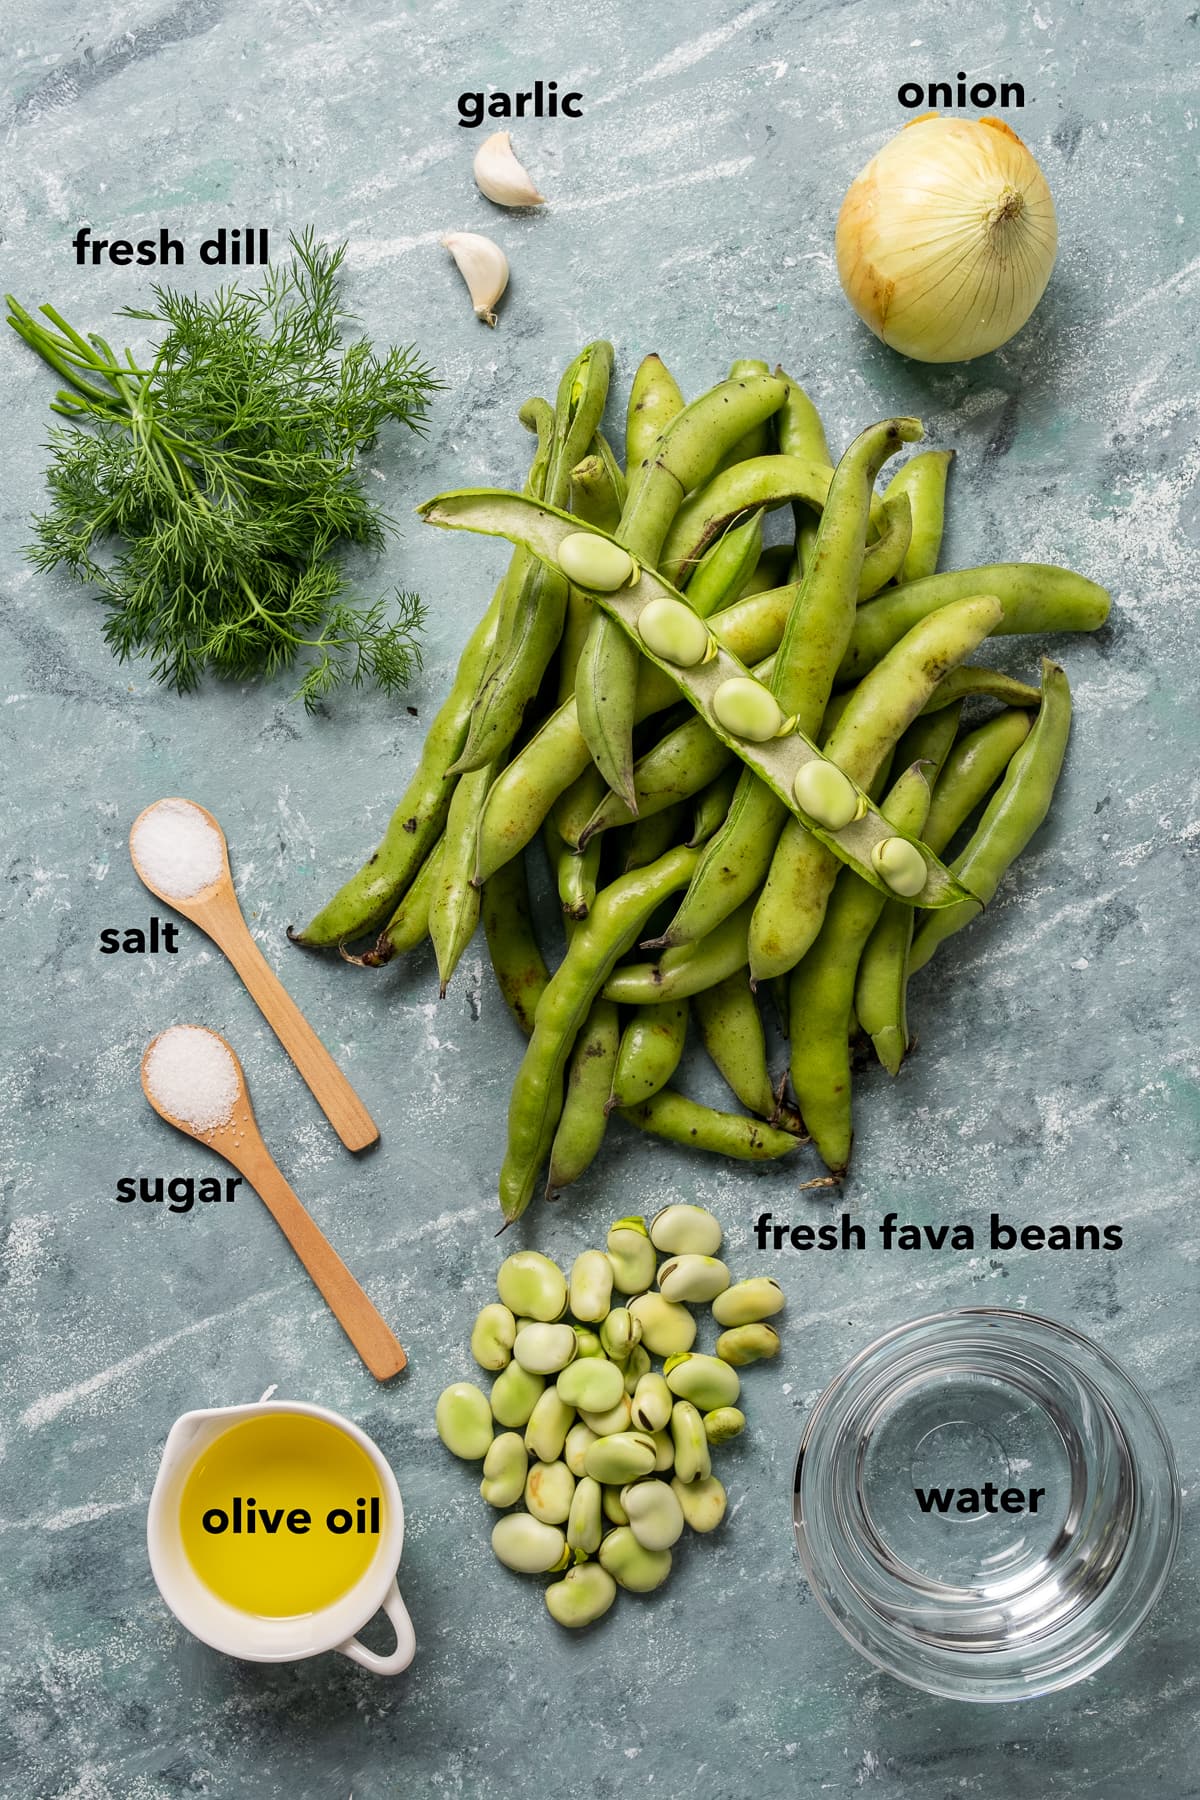 Fresh fava bean pods, fava beans without the pod, olive oil in a cup, water in a glass, an onion, two colves garlic, a bunch of fresh dill, salt and sugar in two wooden spoons on a grey background.